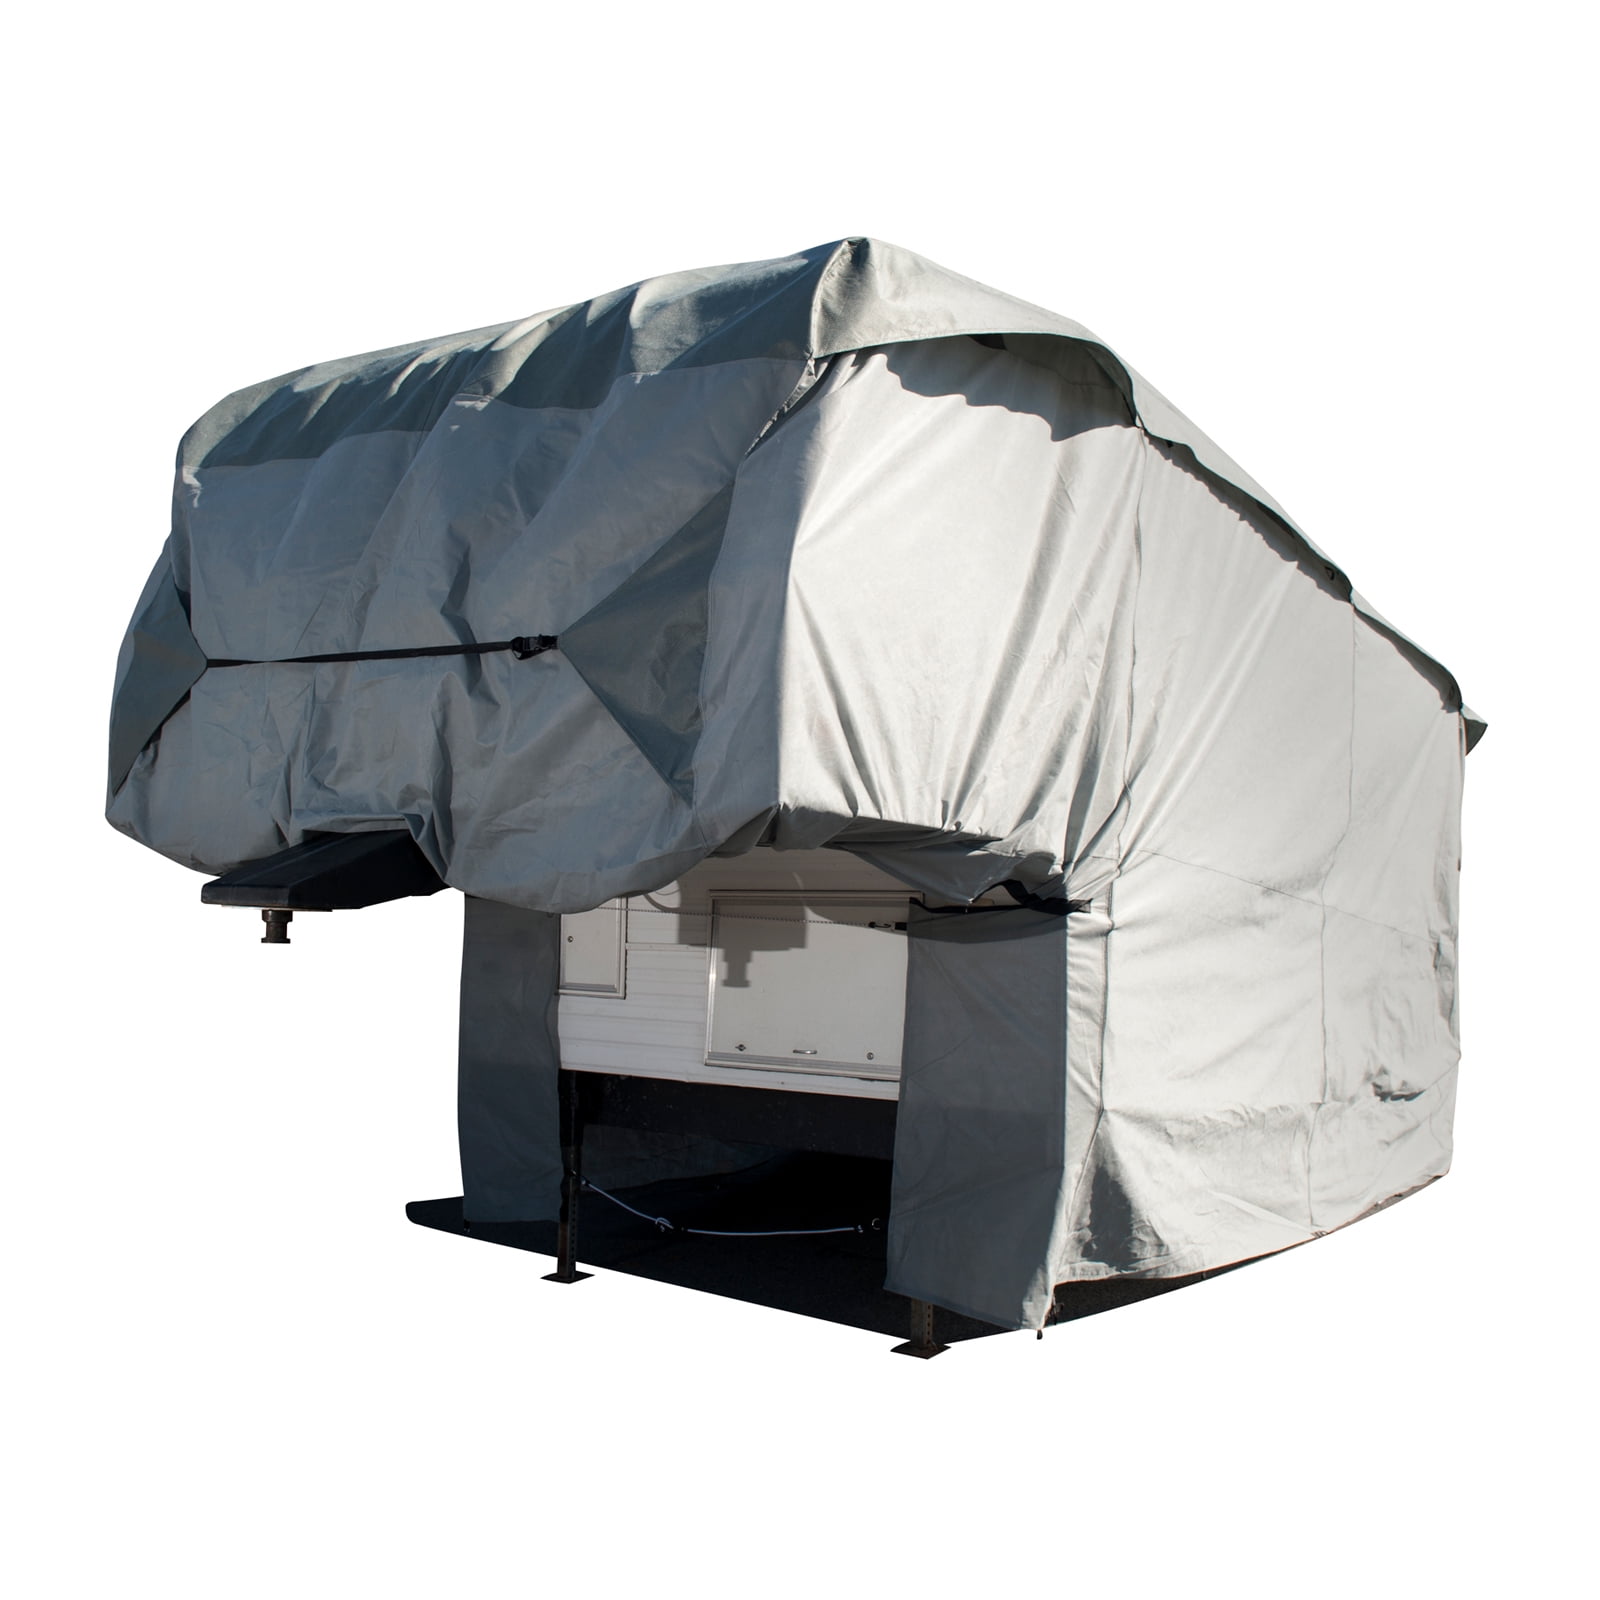 Budge Standard 5th Wheel RV Cover, Basic Outdoor Protection for RVs, Multiple Sizes Walmart